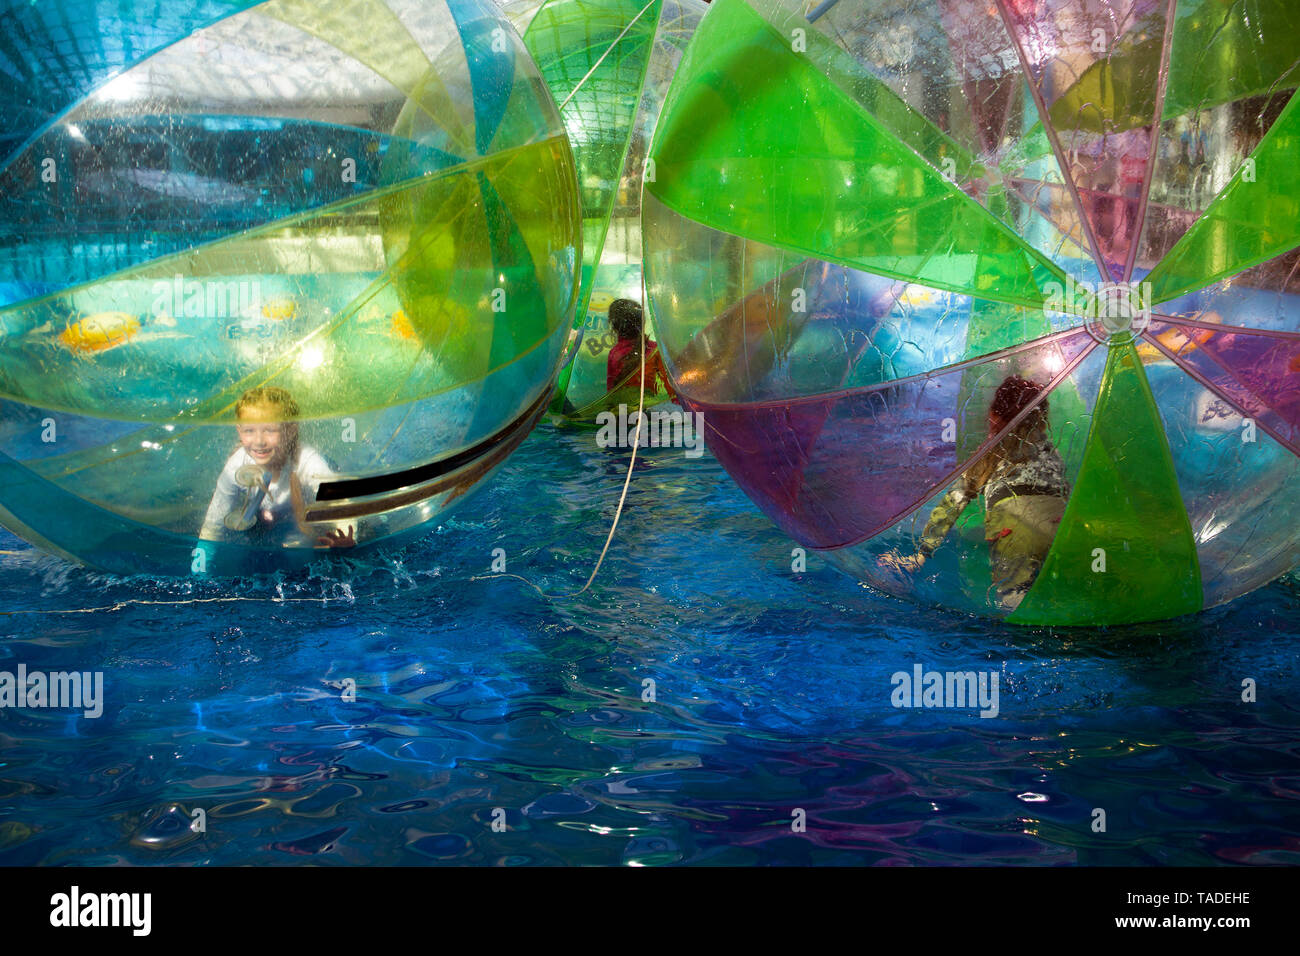 Little girl playing inside the big transparent water bubble in swimming pool Stock Photo